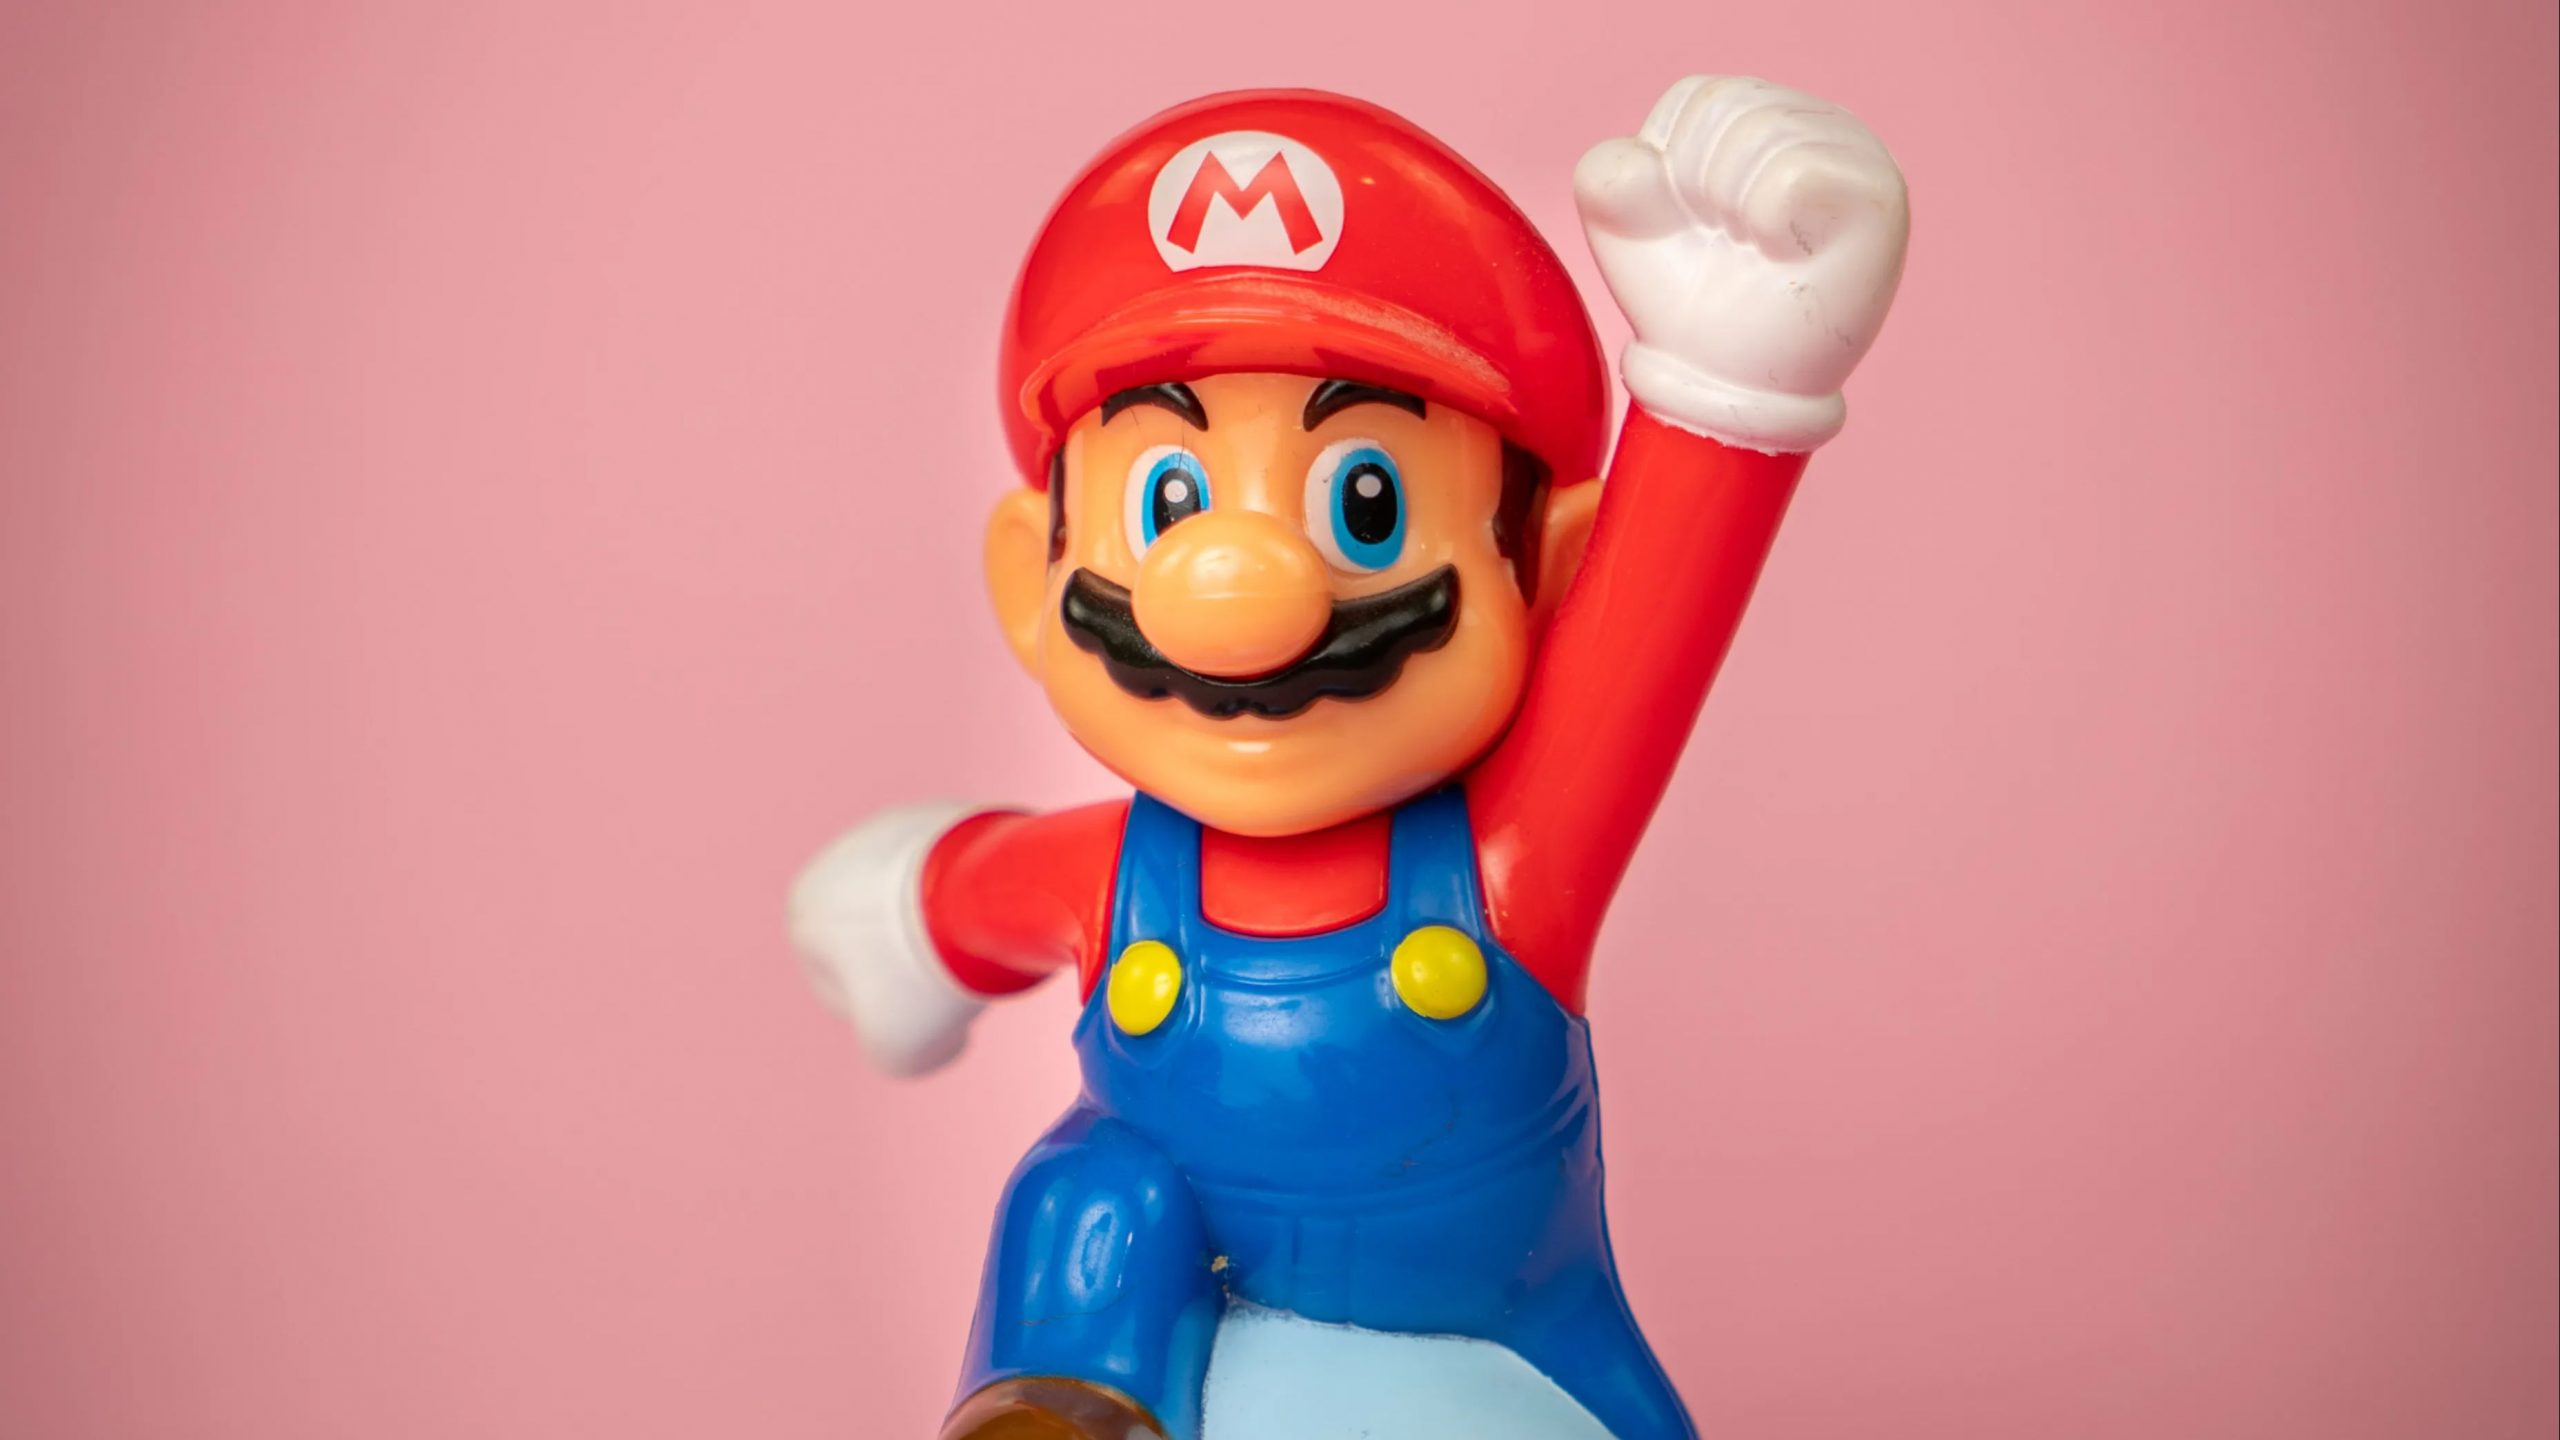 ‘Happy Mario Day’: Fans take to Twitter to celebrate the Italian plumber